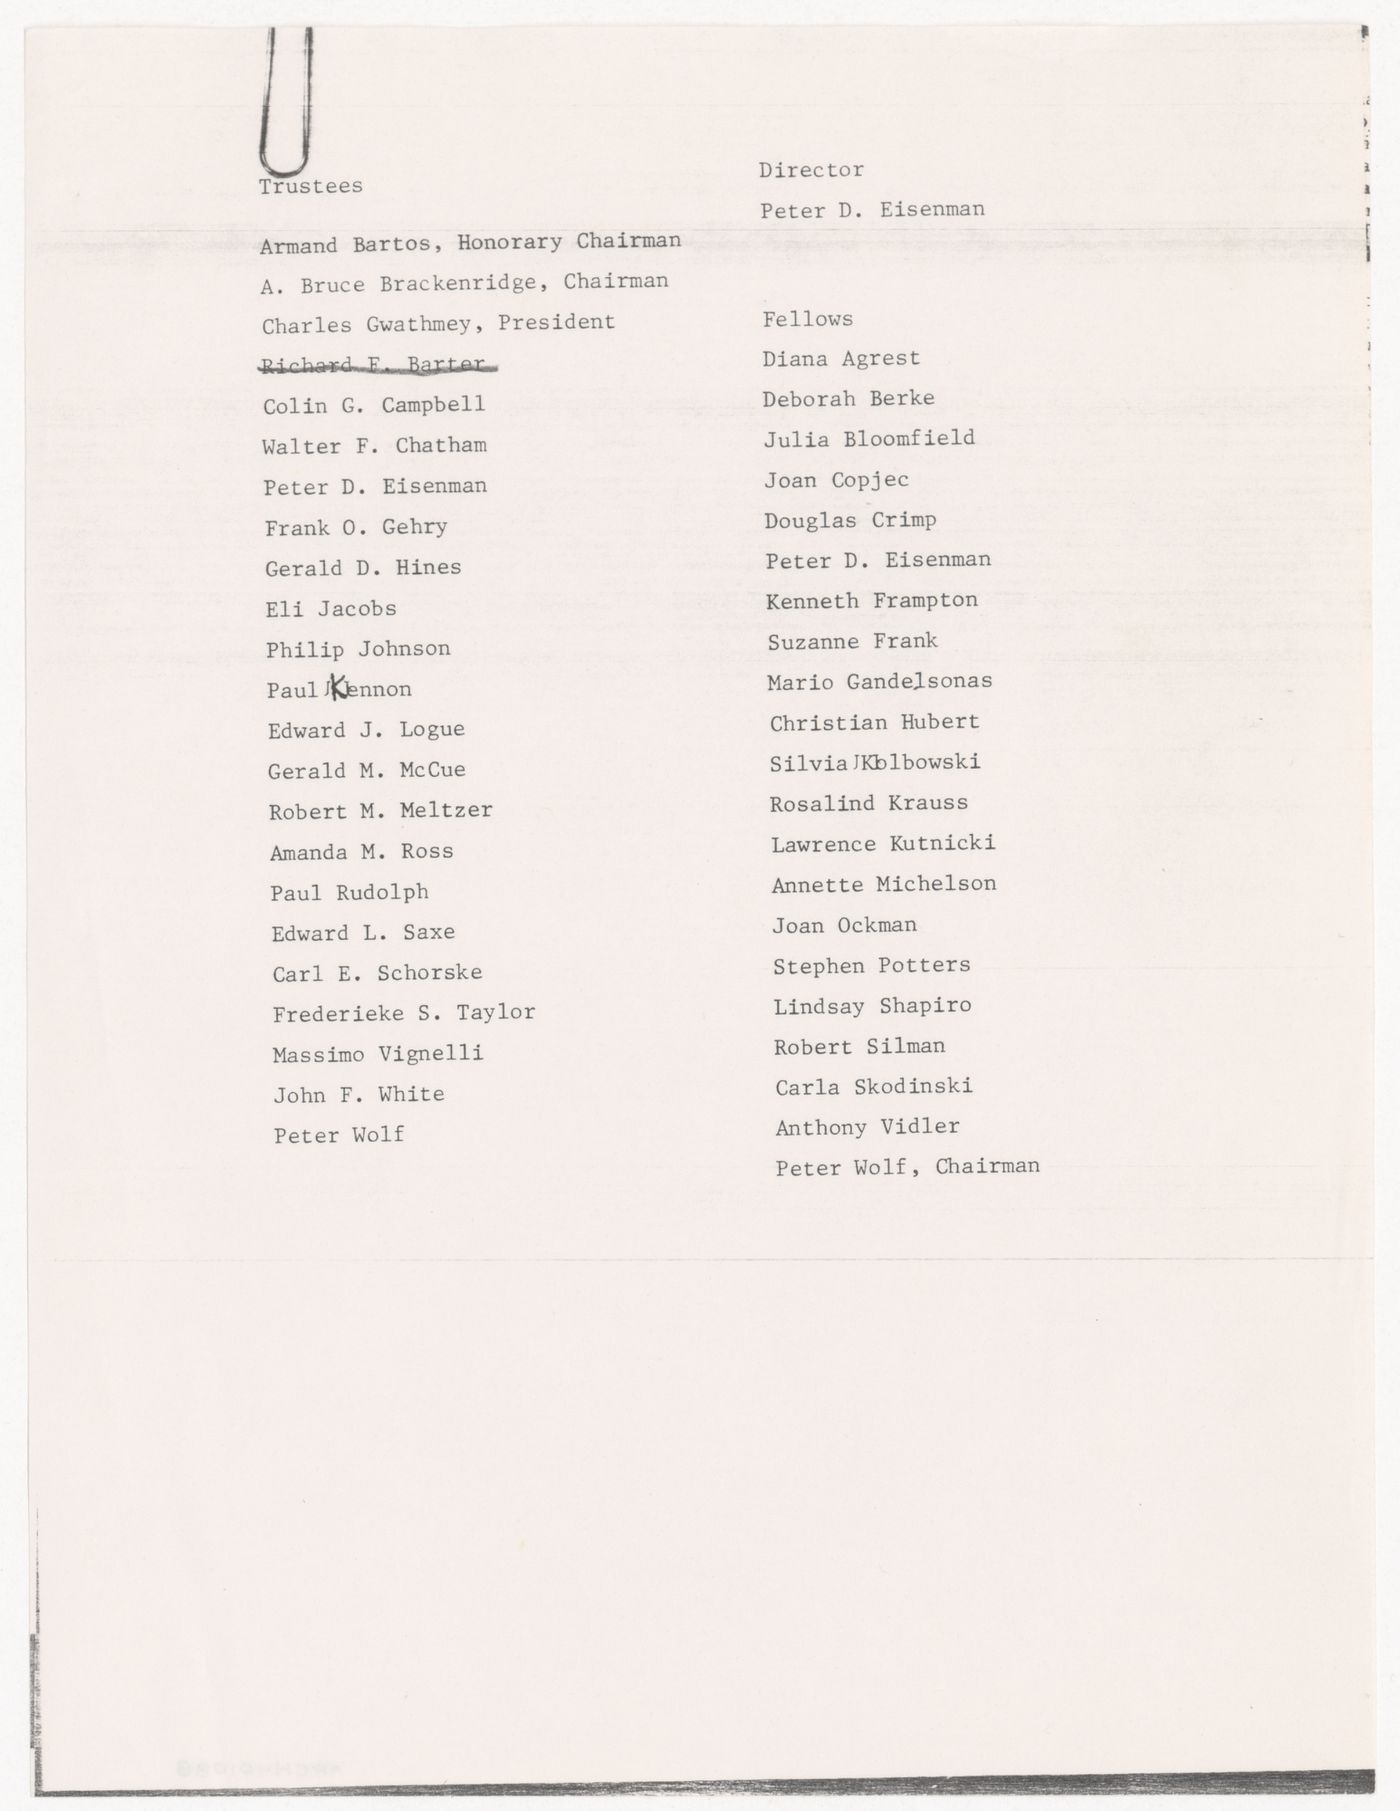 List of IAUS Trustees and Fellows